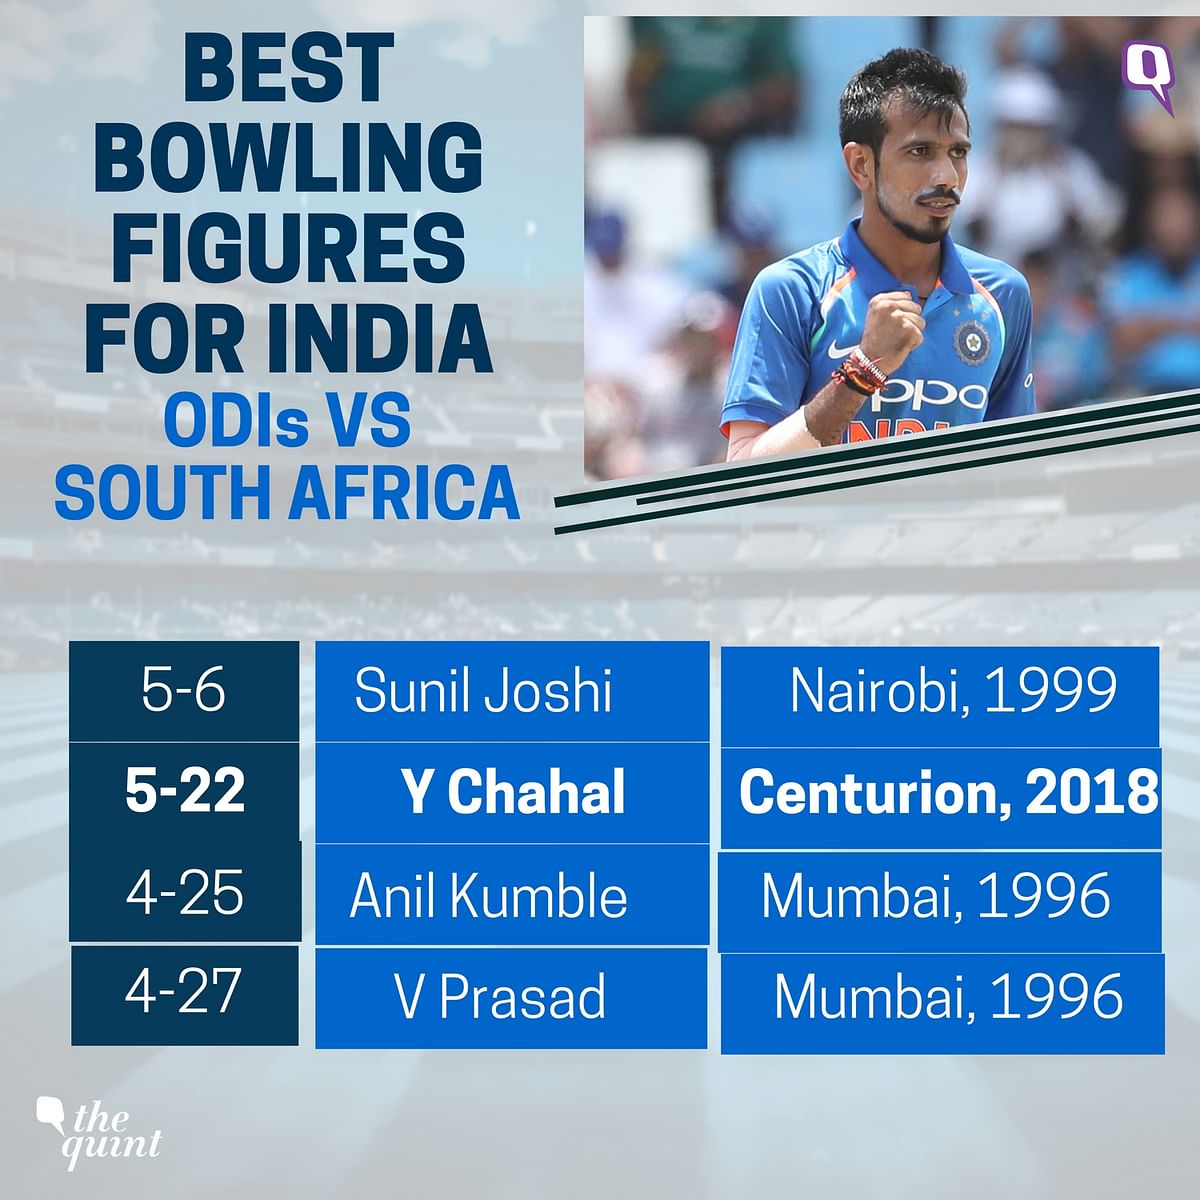 Yuzvendra Chahal returned with figures of 5 for 22, while Kuldeep Yadav (3/20) accounted for three wickets.